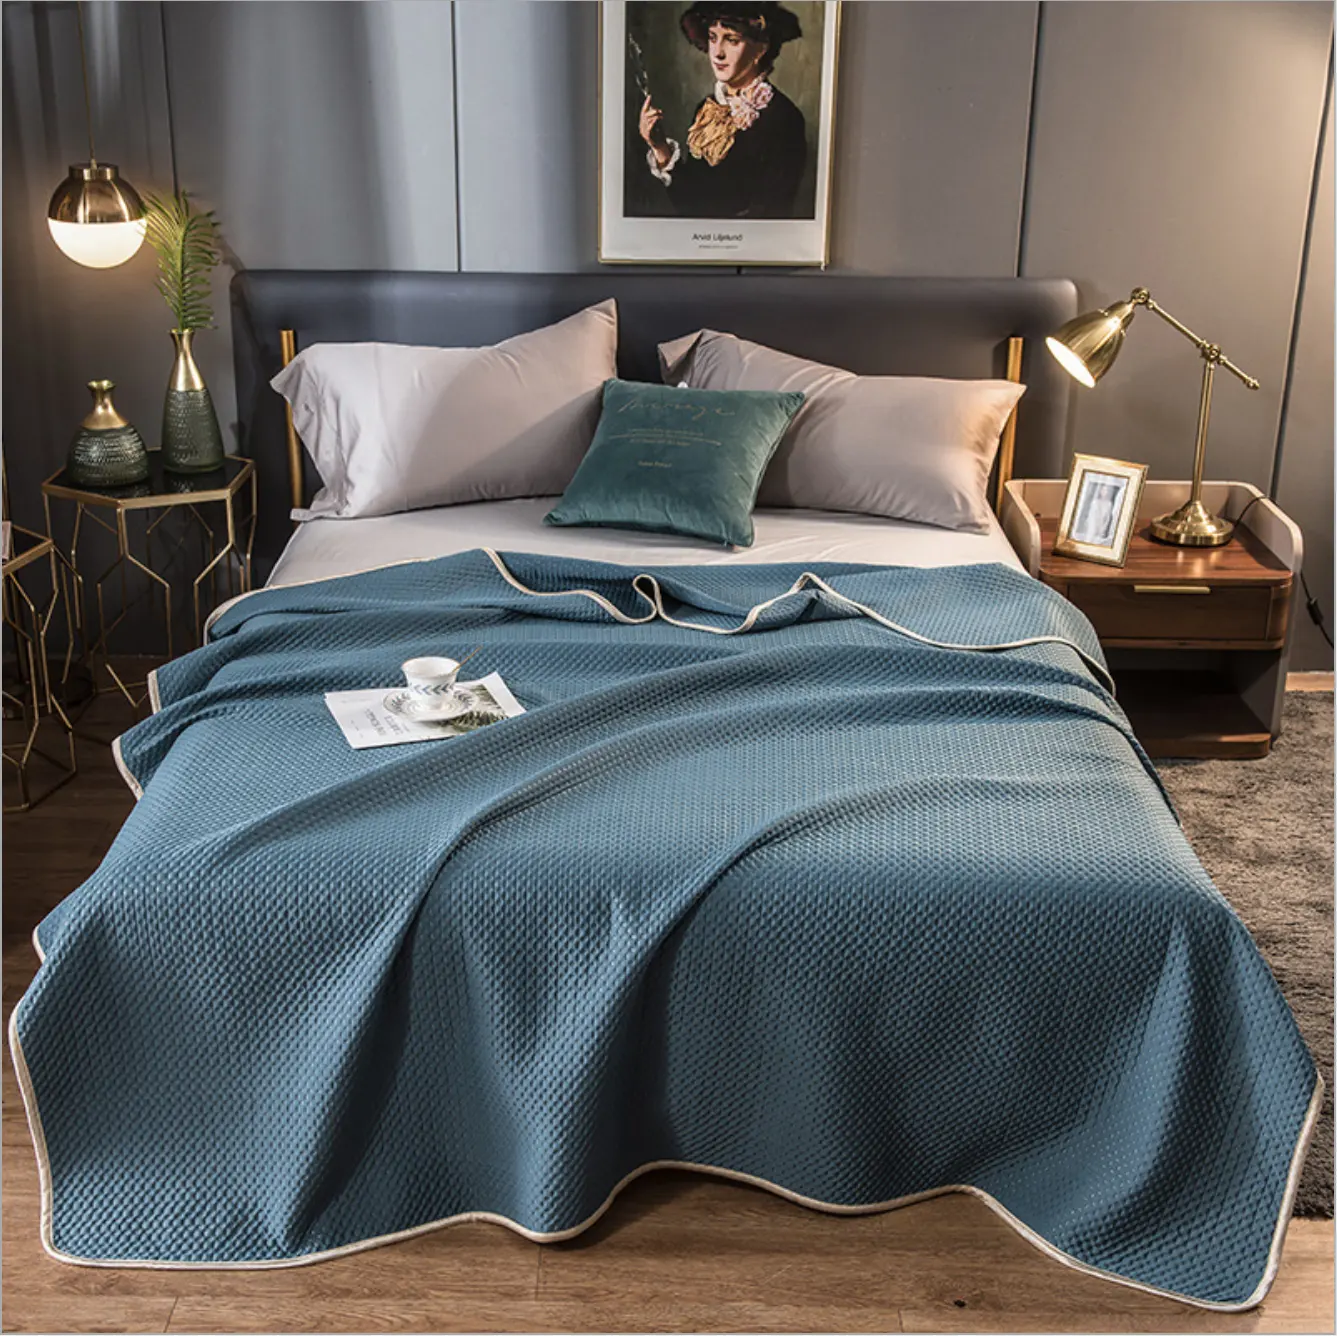 PC2127 Chinese Luxury Super Soft 100% Polyester Microfiber Bedspreads Bedding Set Quilt Bed Spread